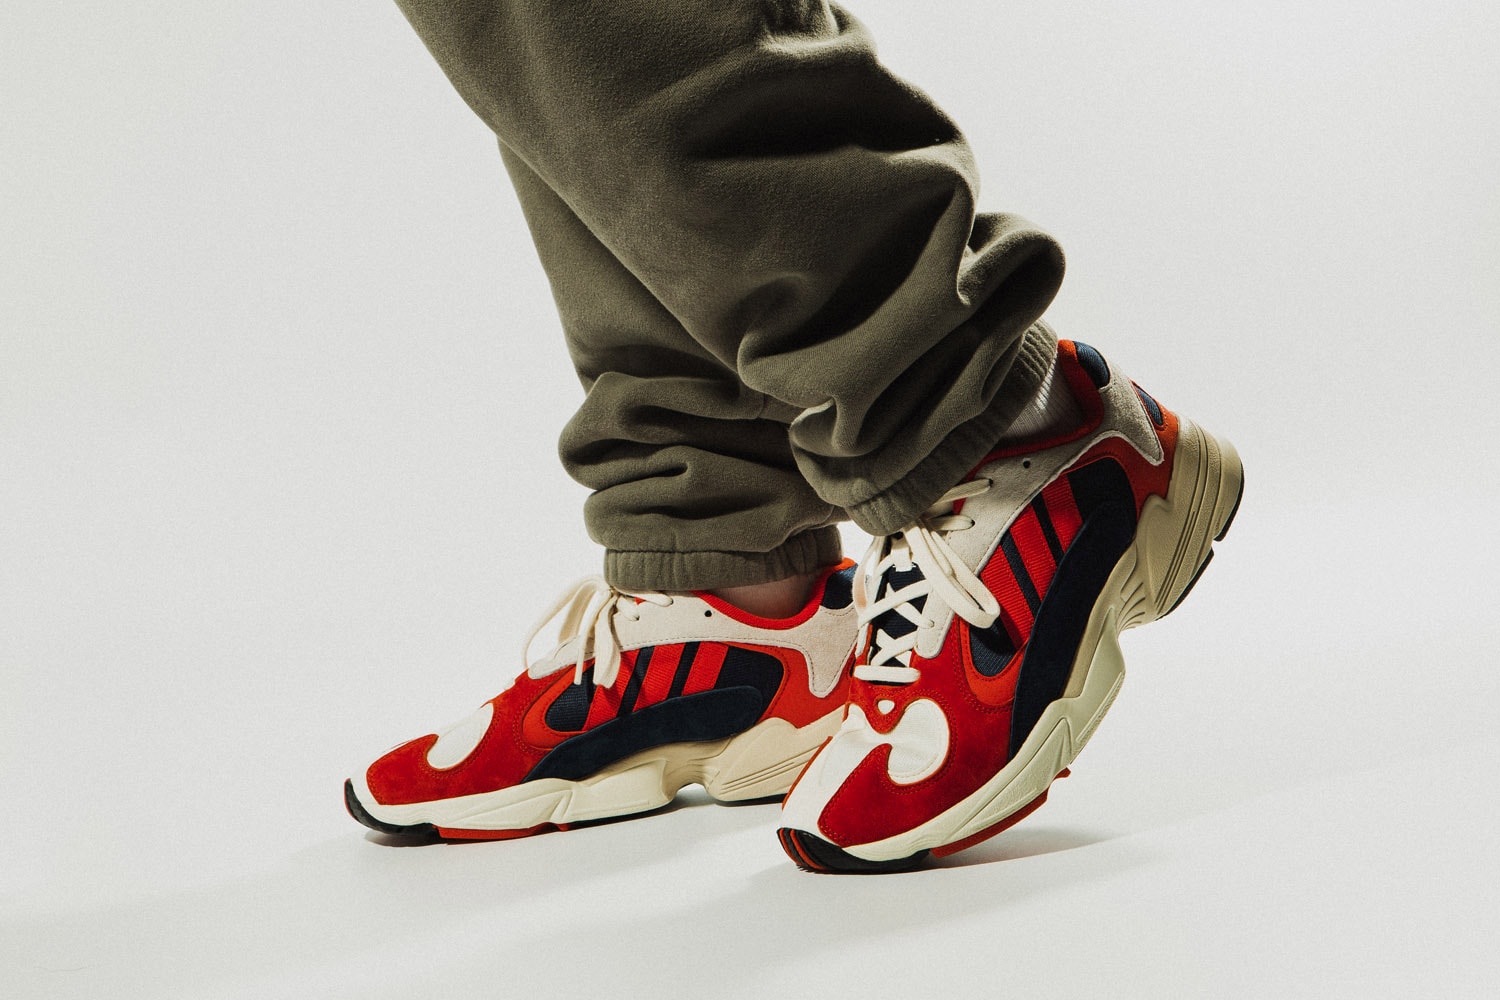 adidas Originals YUNG-1 Closer Look On-Foot Kicks Shoes Trainers Sneakers Orange White Navy Chunky Sneaker Dad Shoe